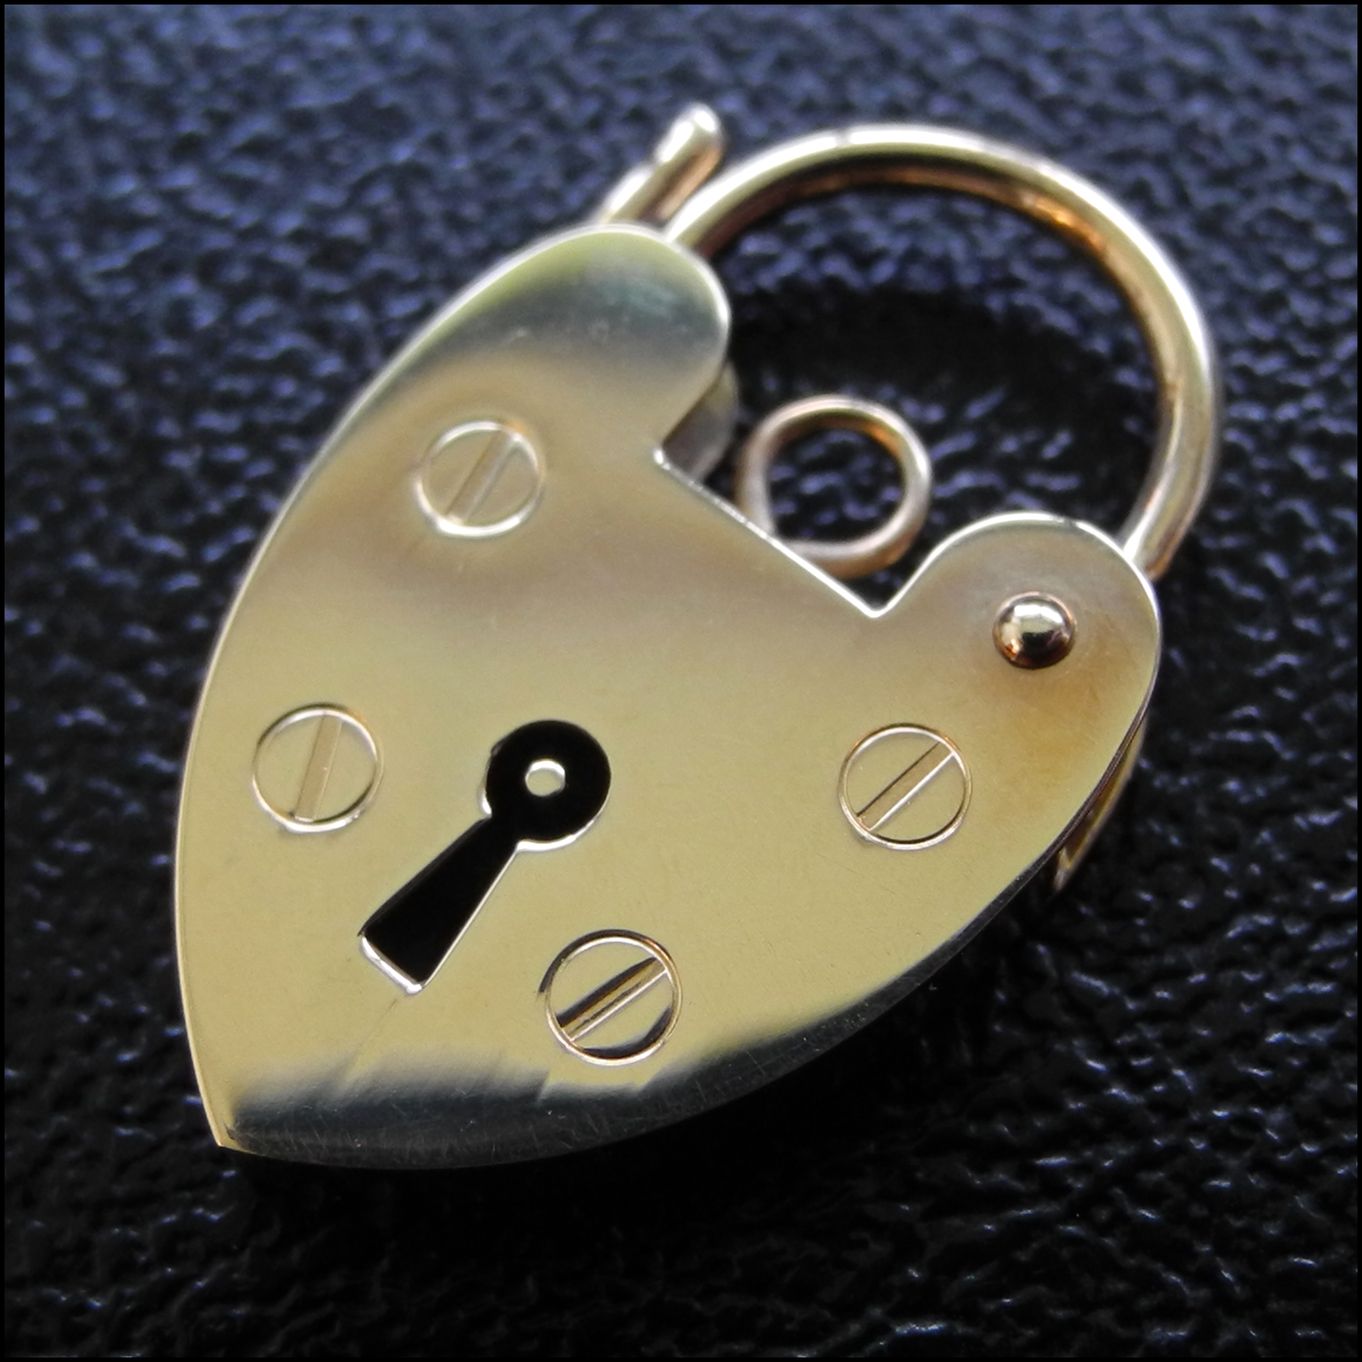 4, 20 or 50 Pieces: Magnetic Silver Bullet Jewelry Clasps – Guerrilla Charm